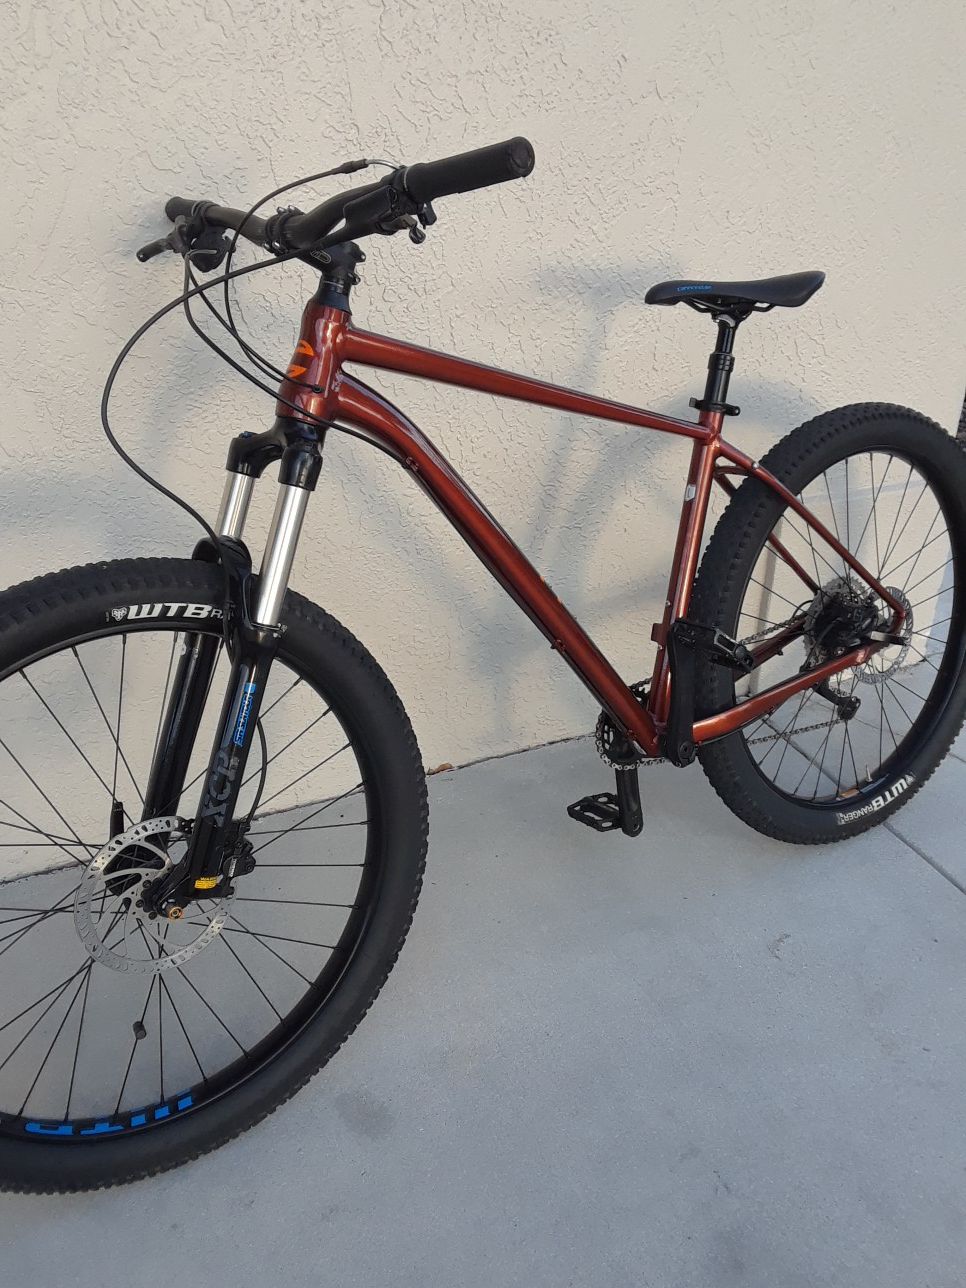 2020 Cannondale CUJO 1 $800 FIRM